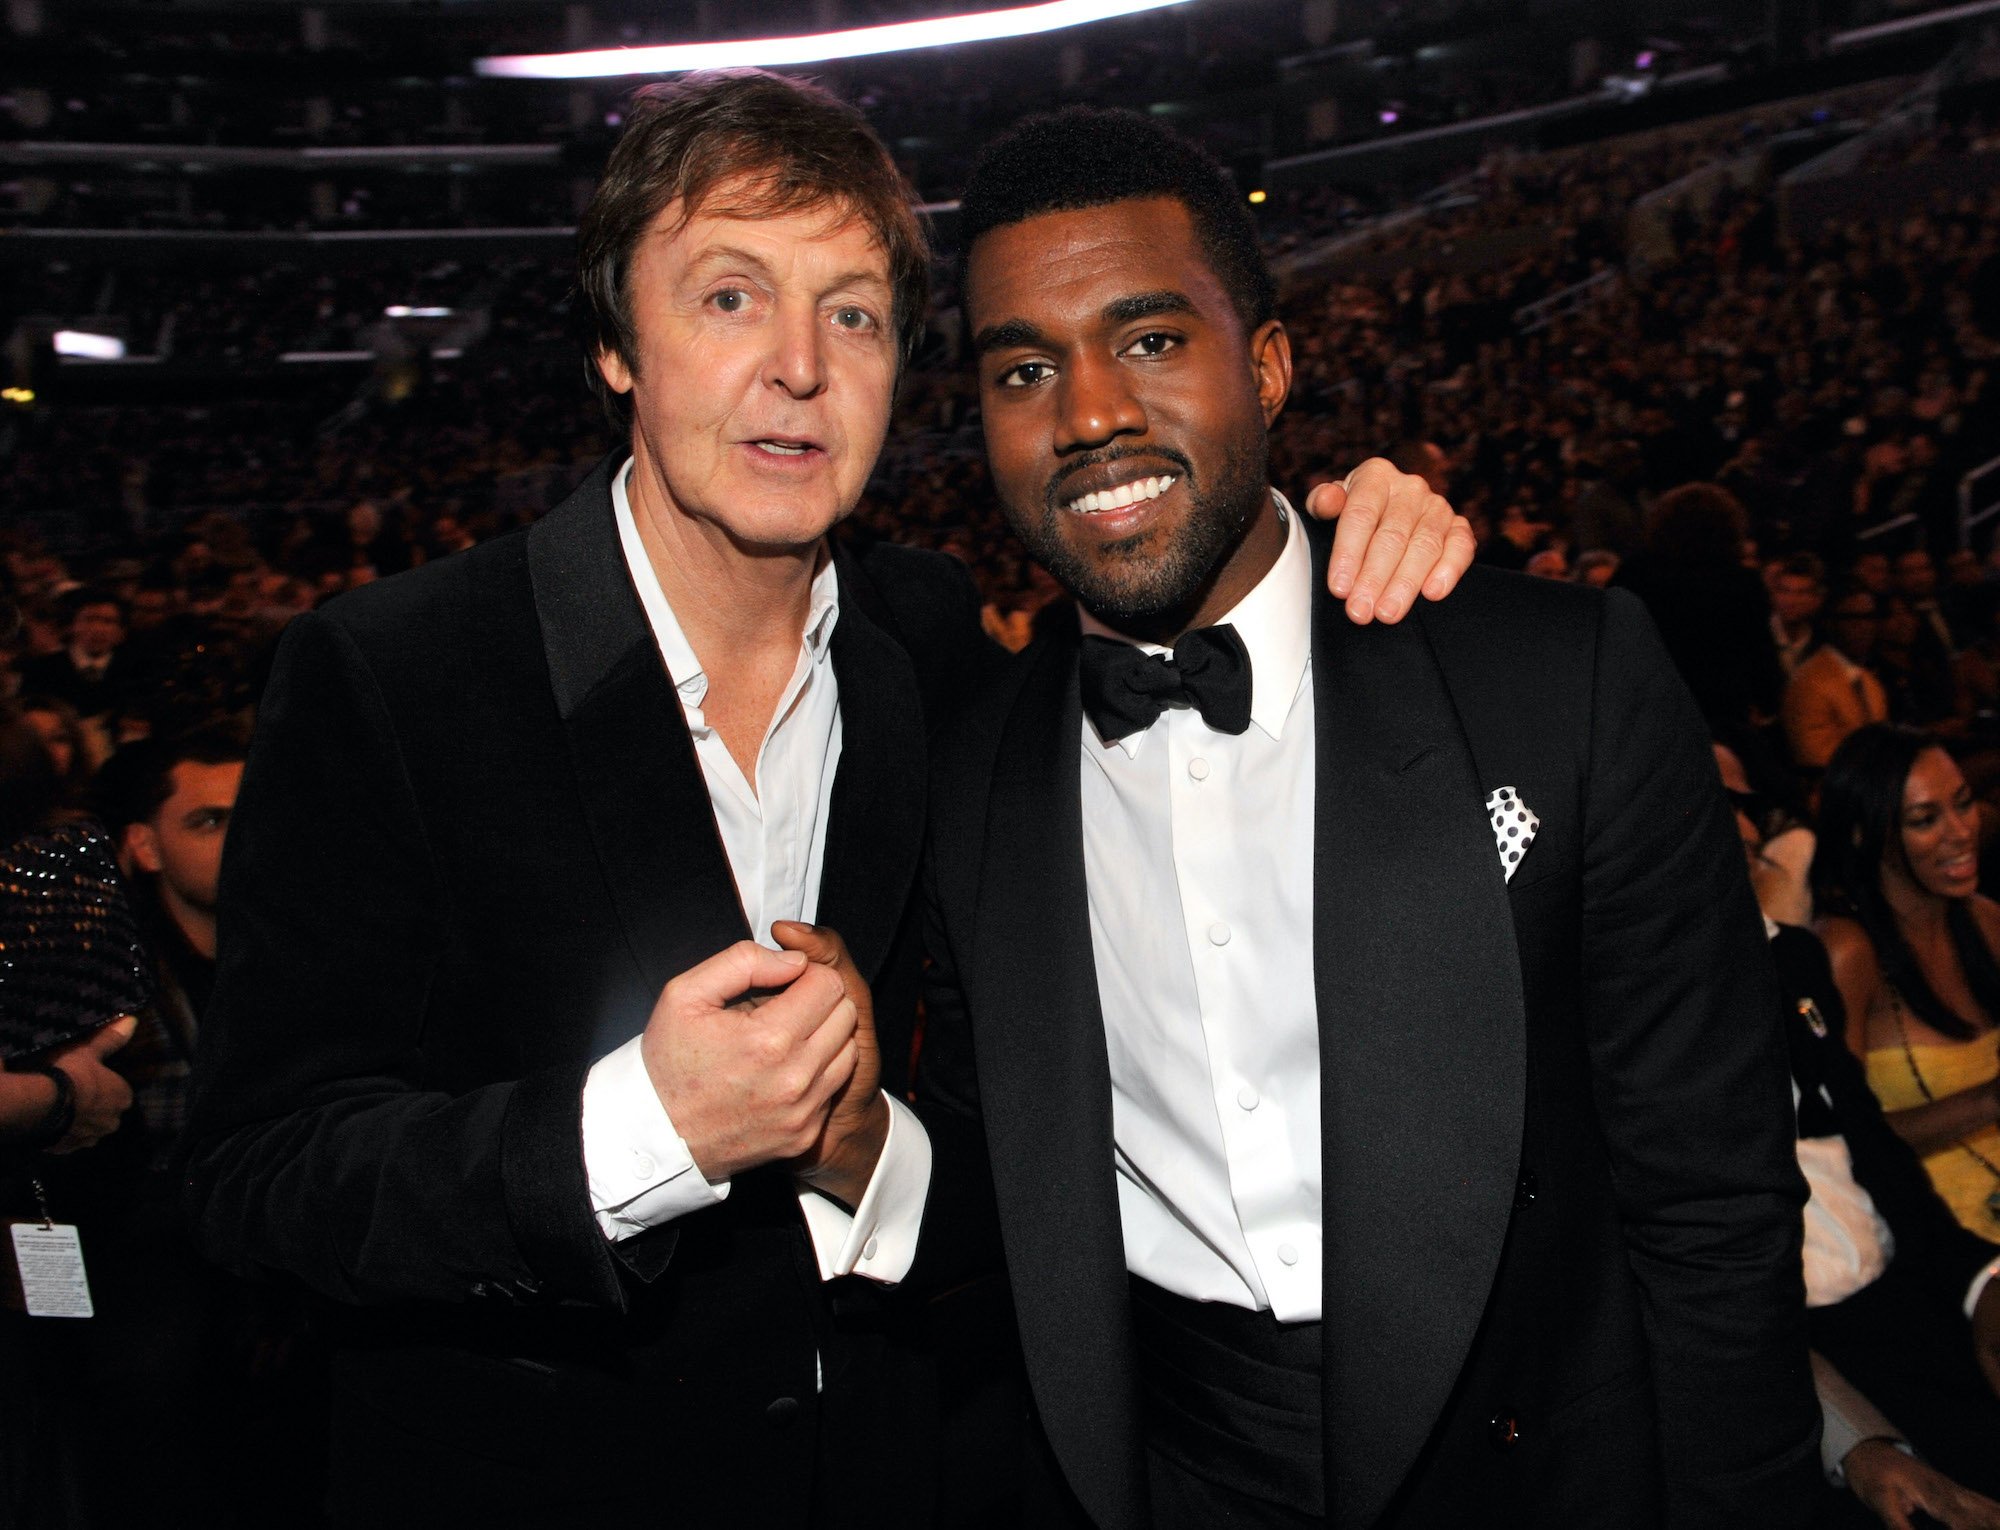 Paul McCartney and Kanye West smiling in front of a large crowd